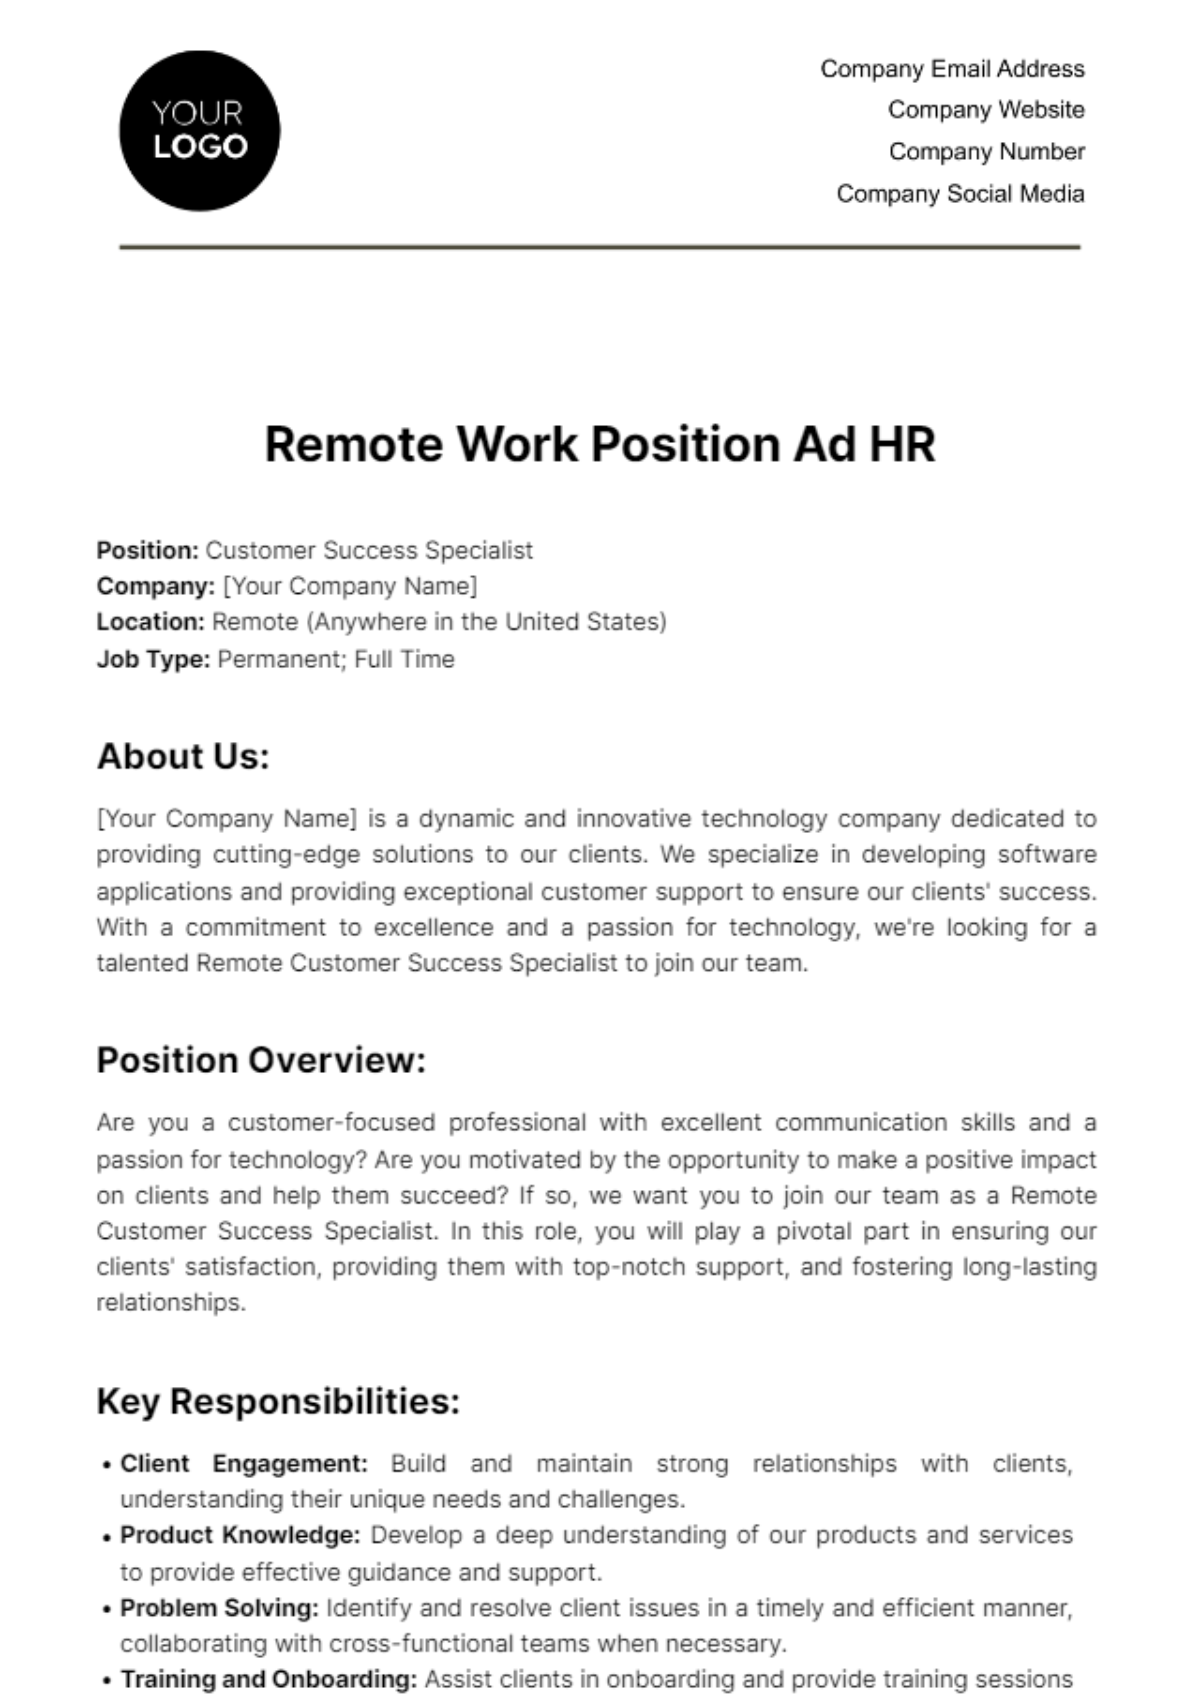 Remote Work Position Ad HR Template